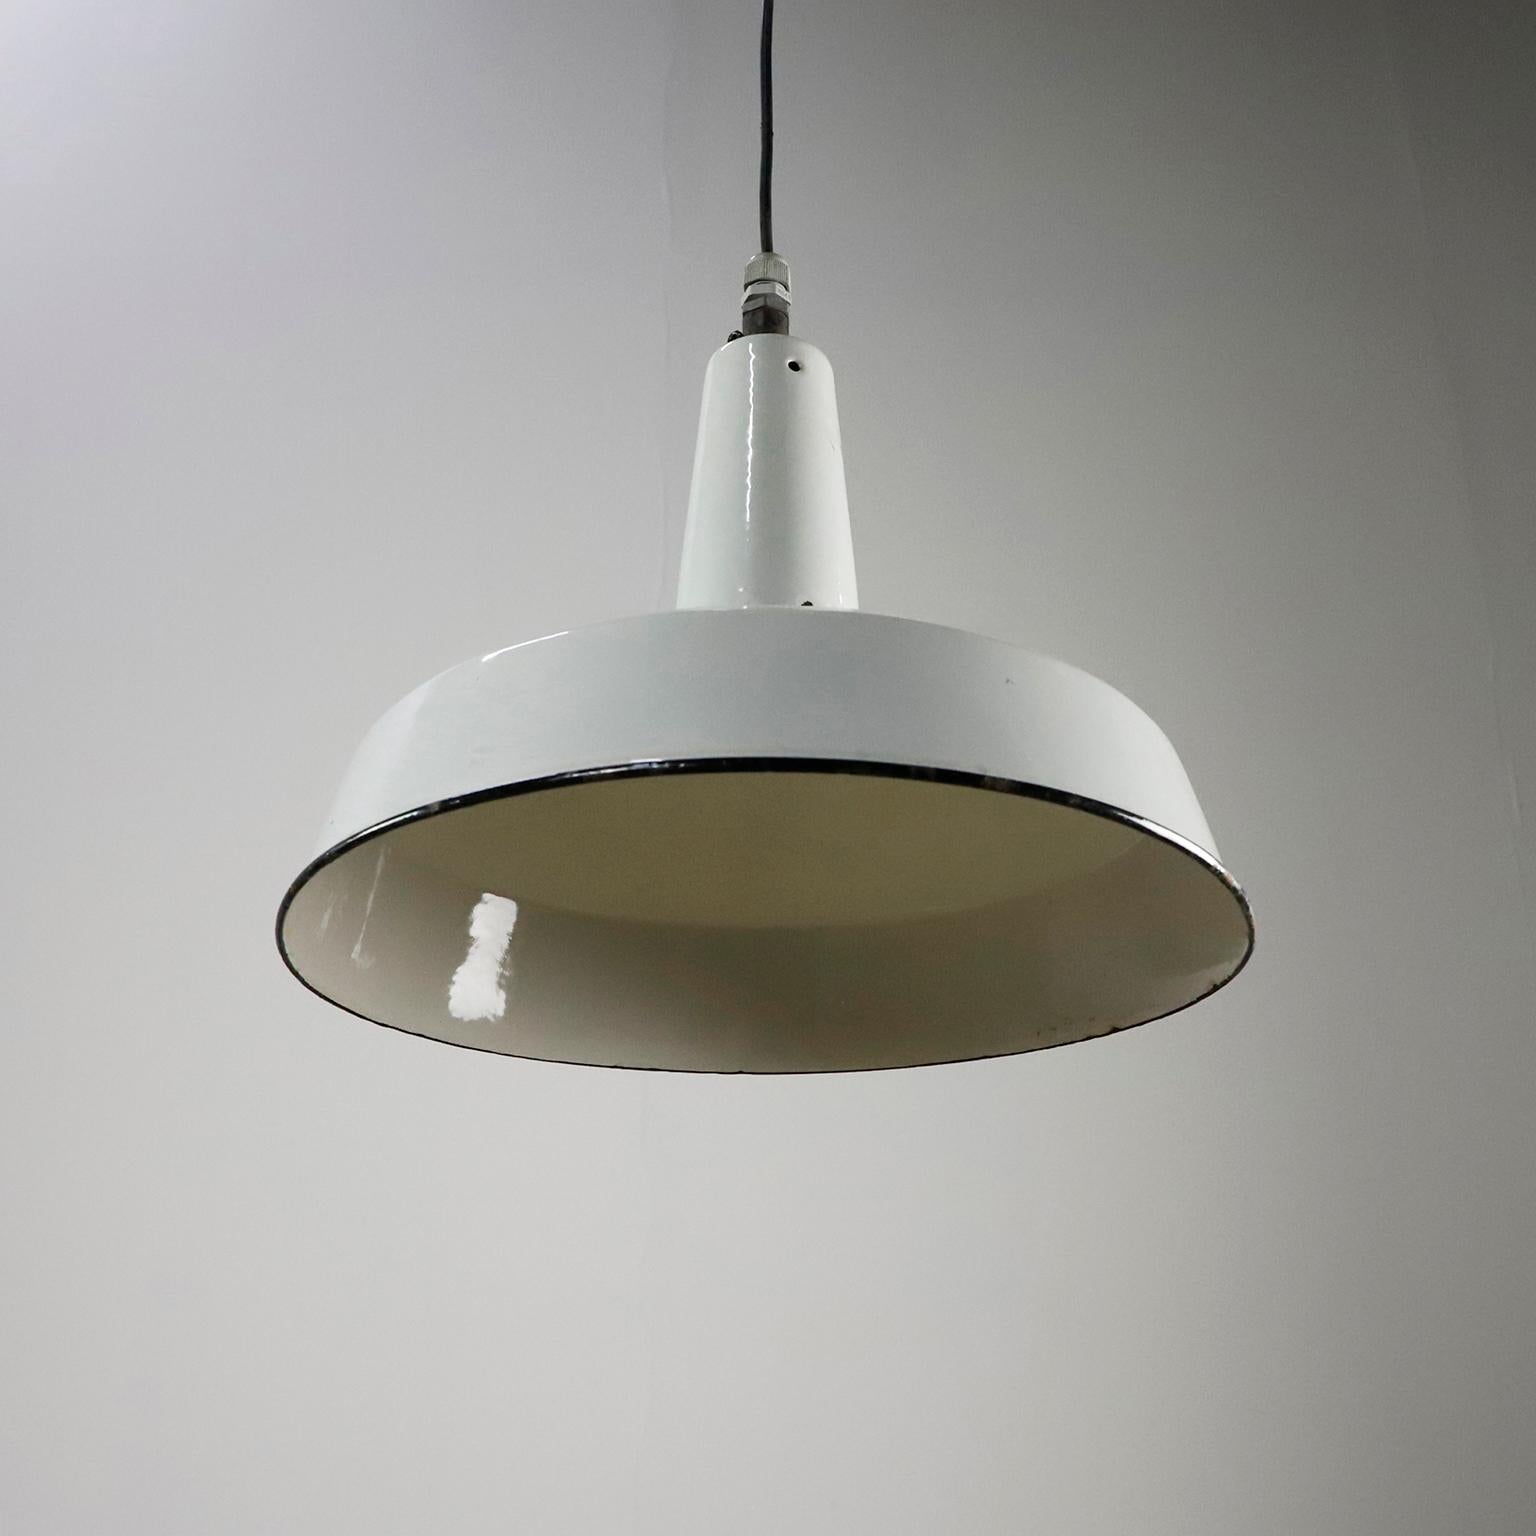 Circa 1960 . We offer this White Enamel and Cast Iron Industrial set of three Pendant Lights.